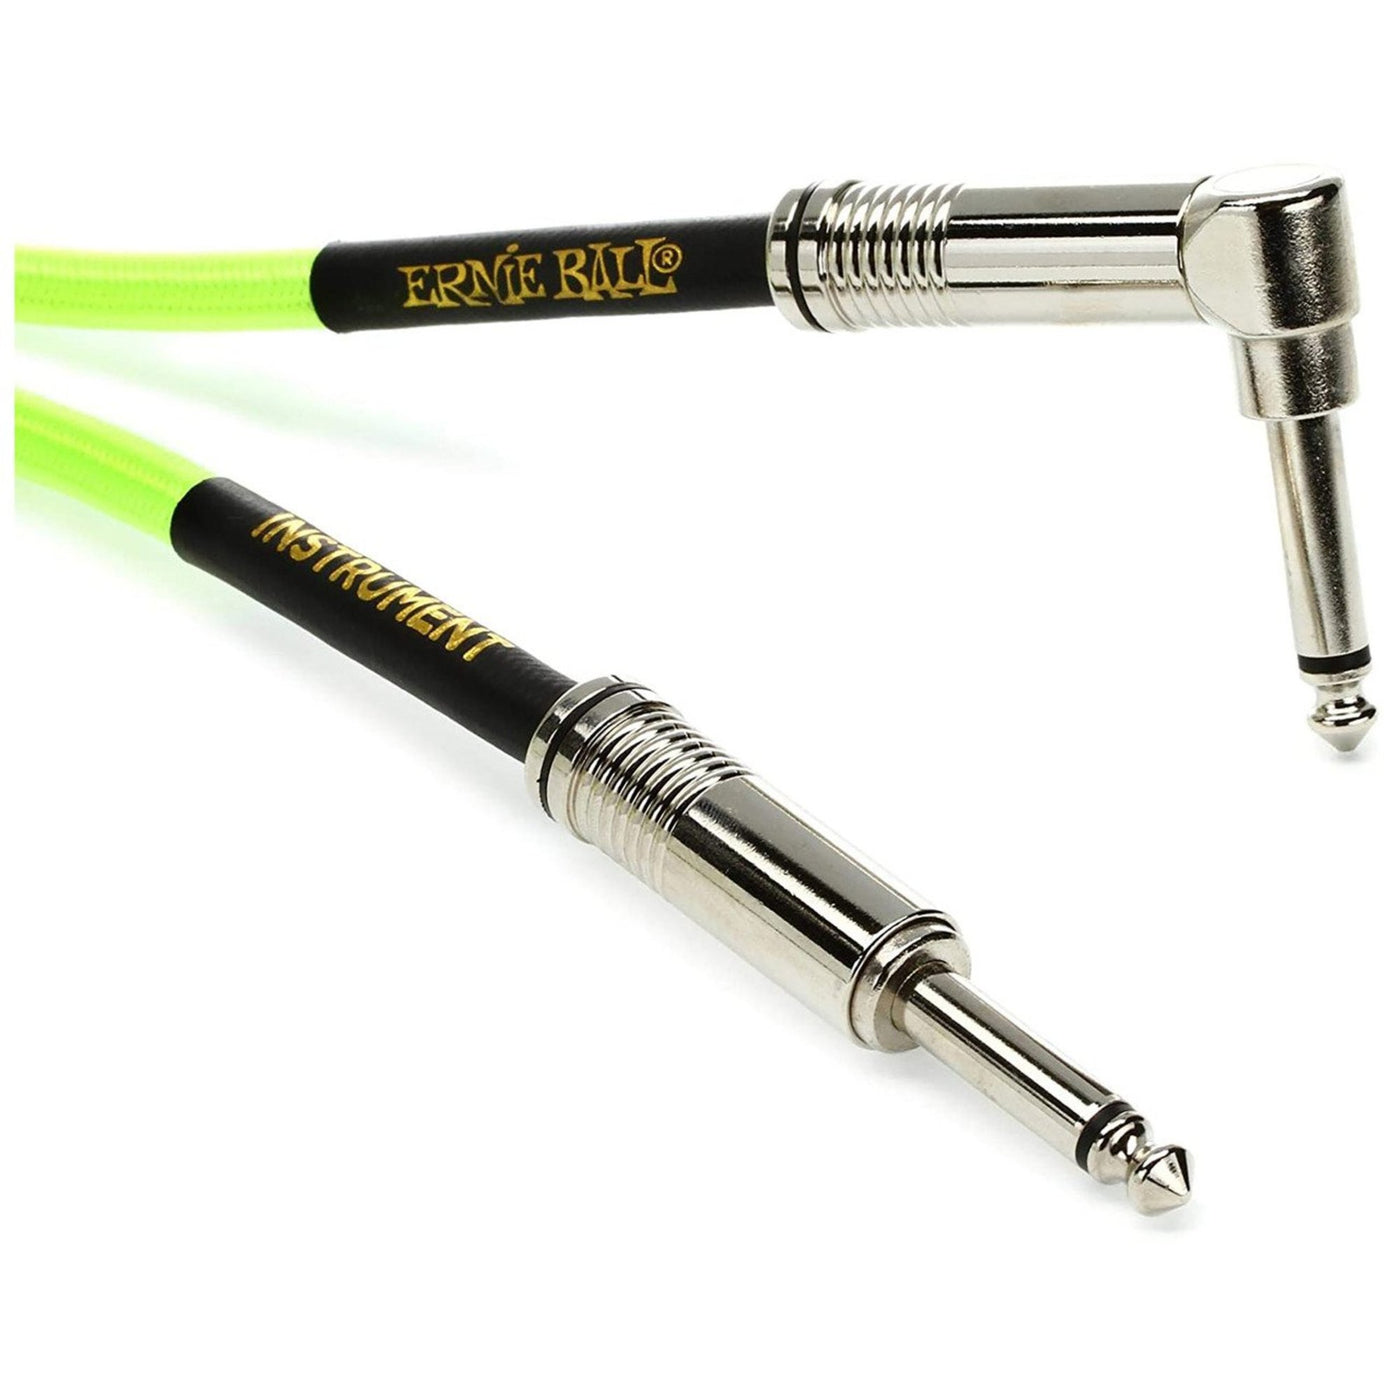 Ernie Ball 10' Instrument Cable, Neon Yellow